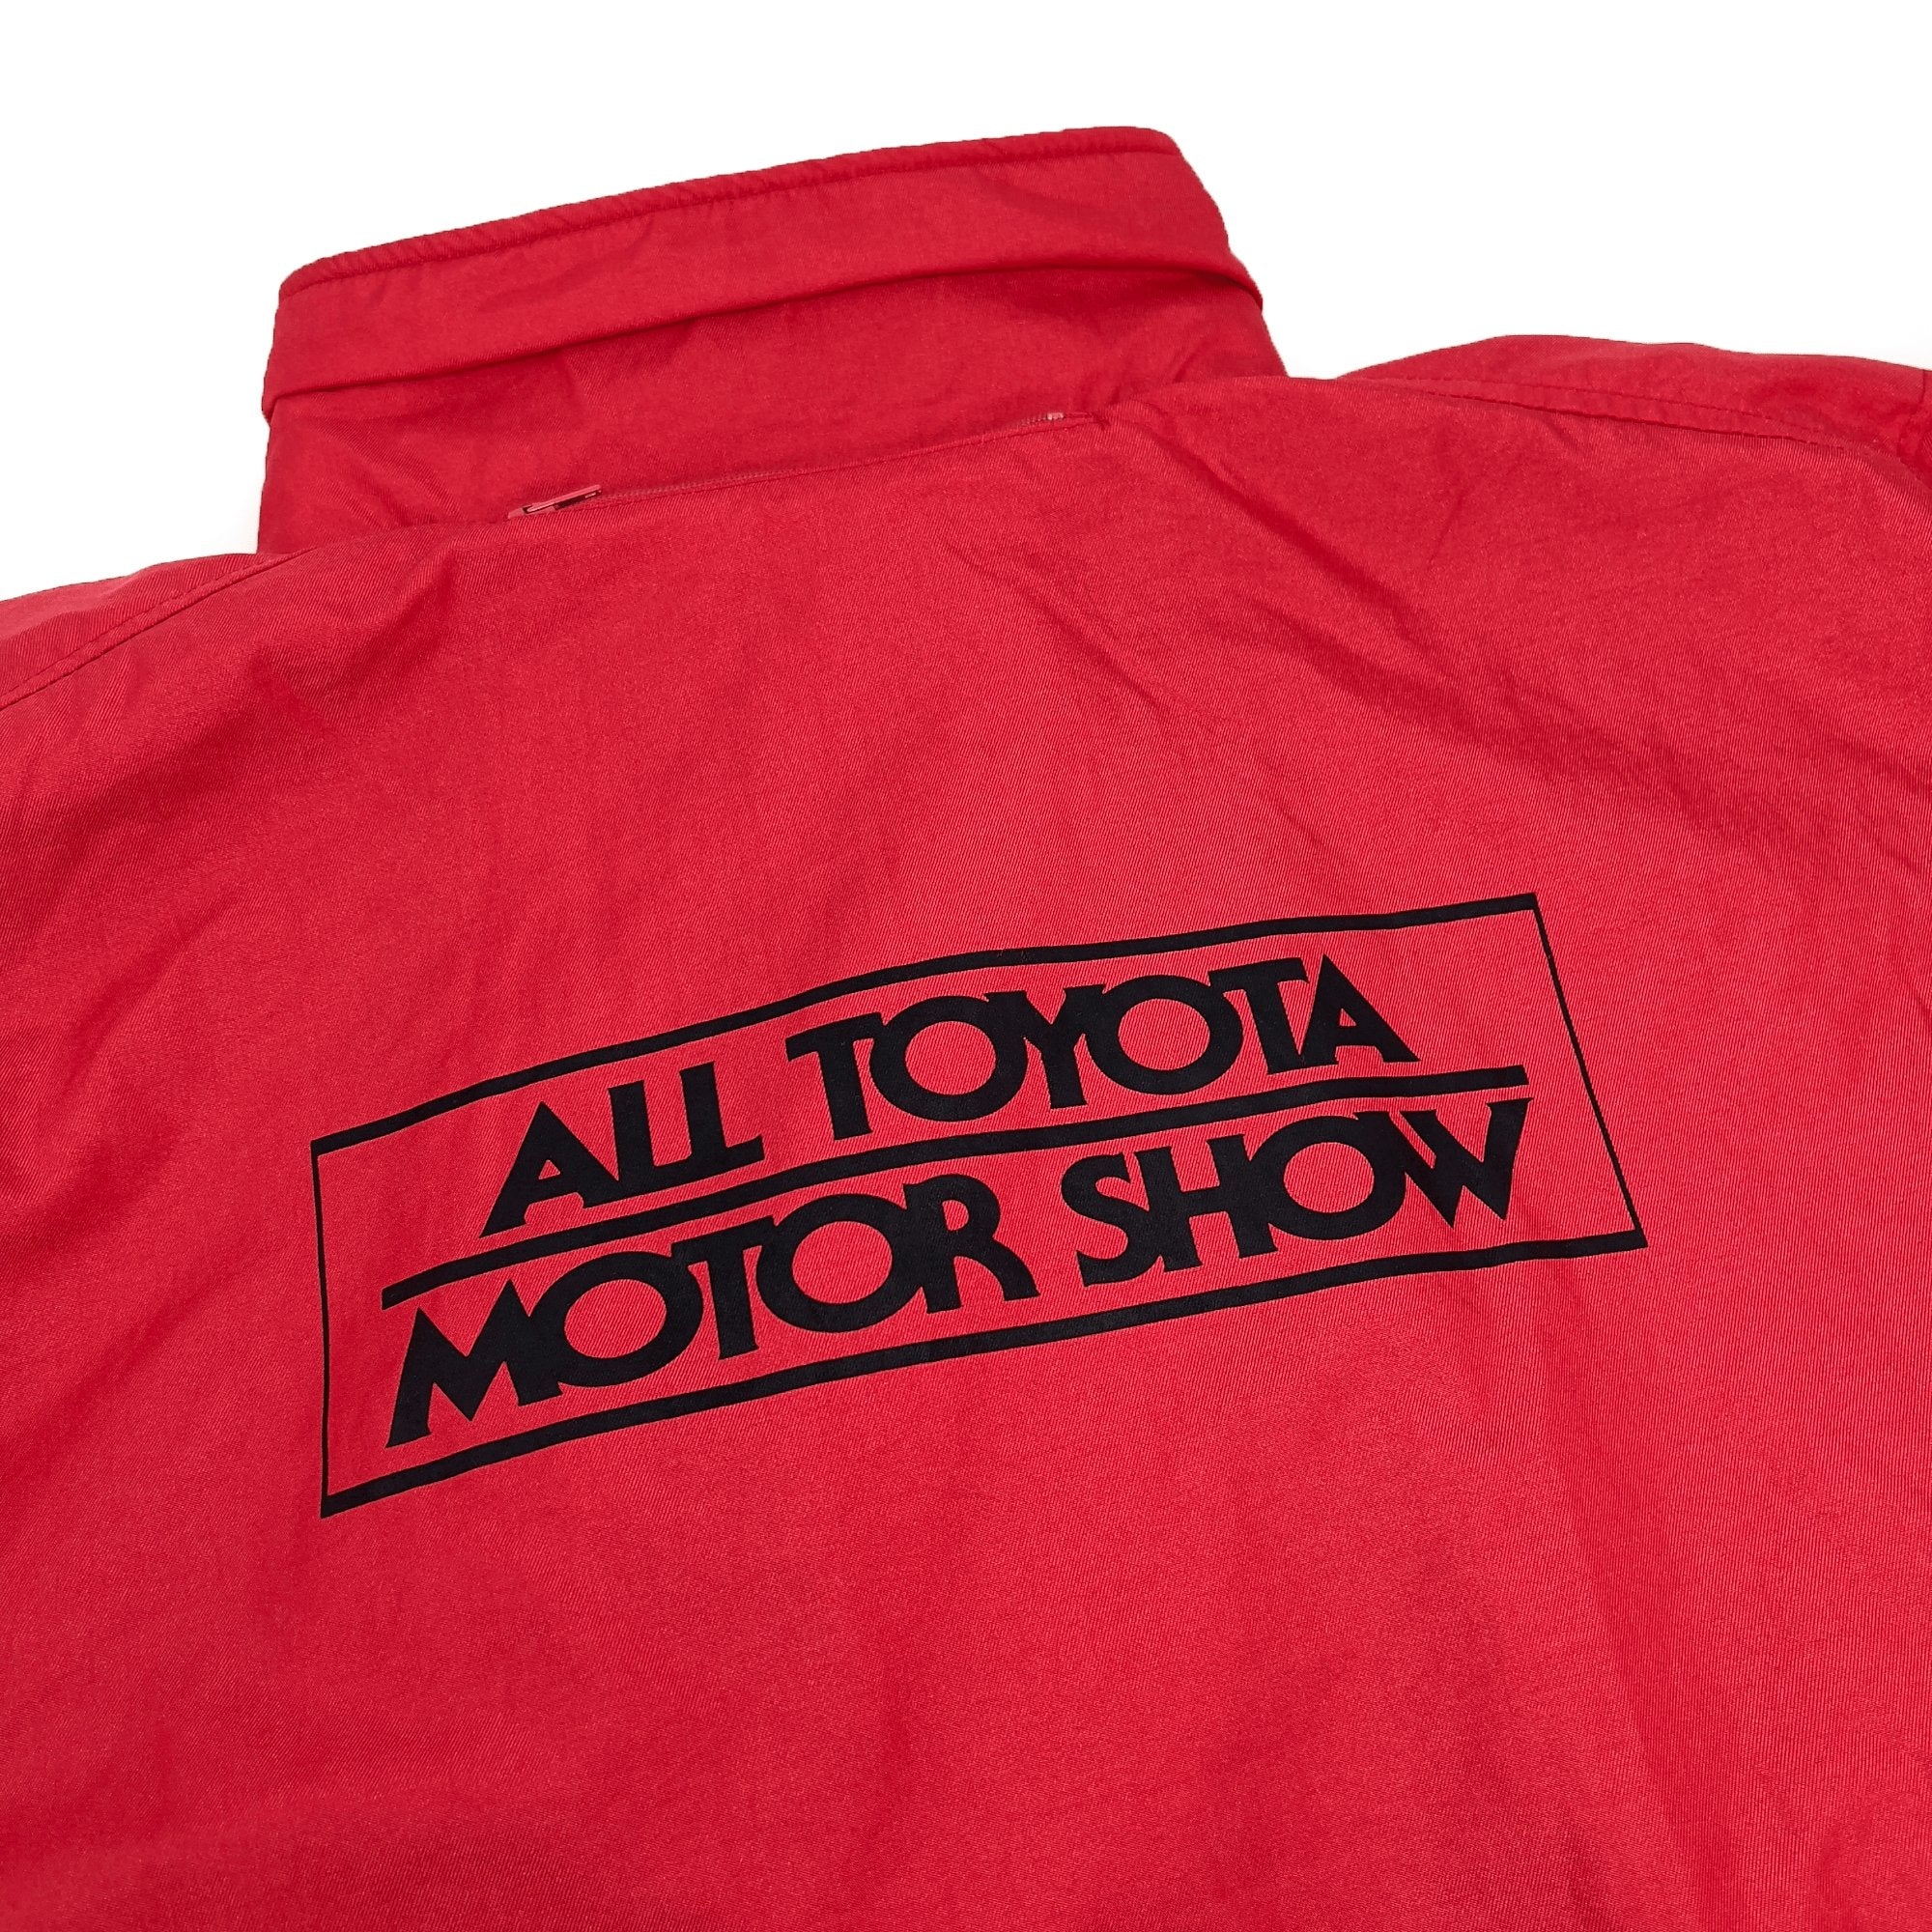 Vintage Japan JDM Limited Edition All Toyota Motor Show Hoodie